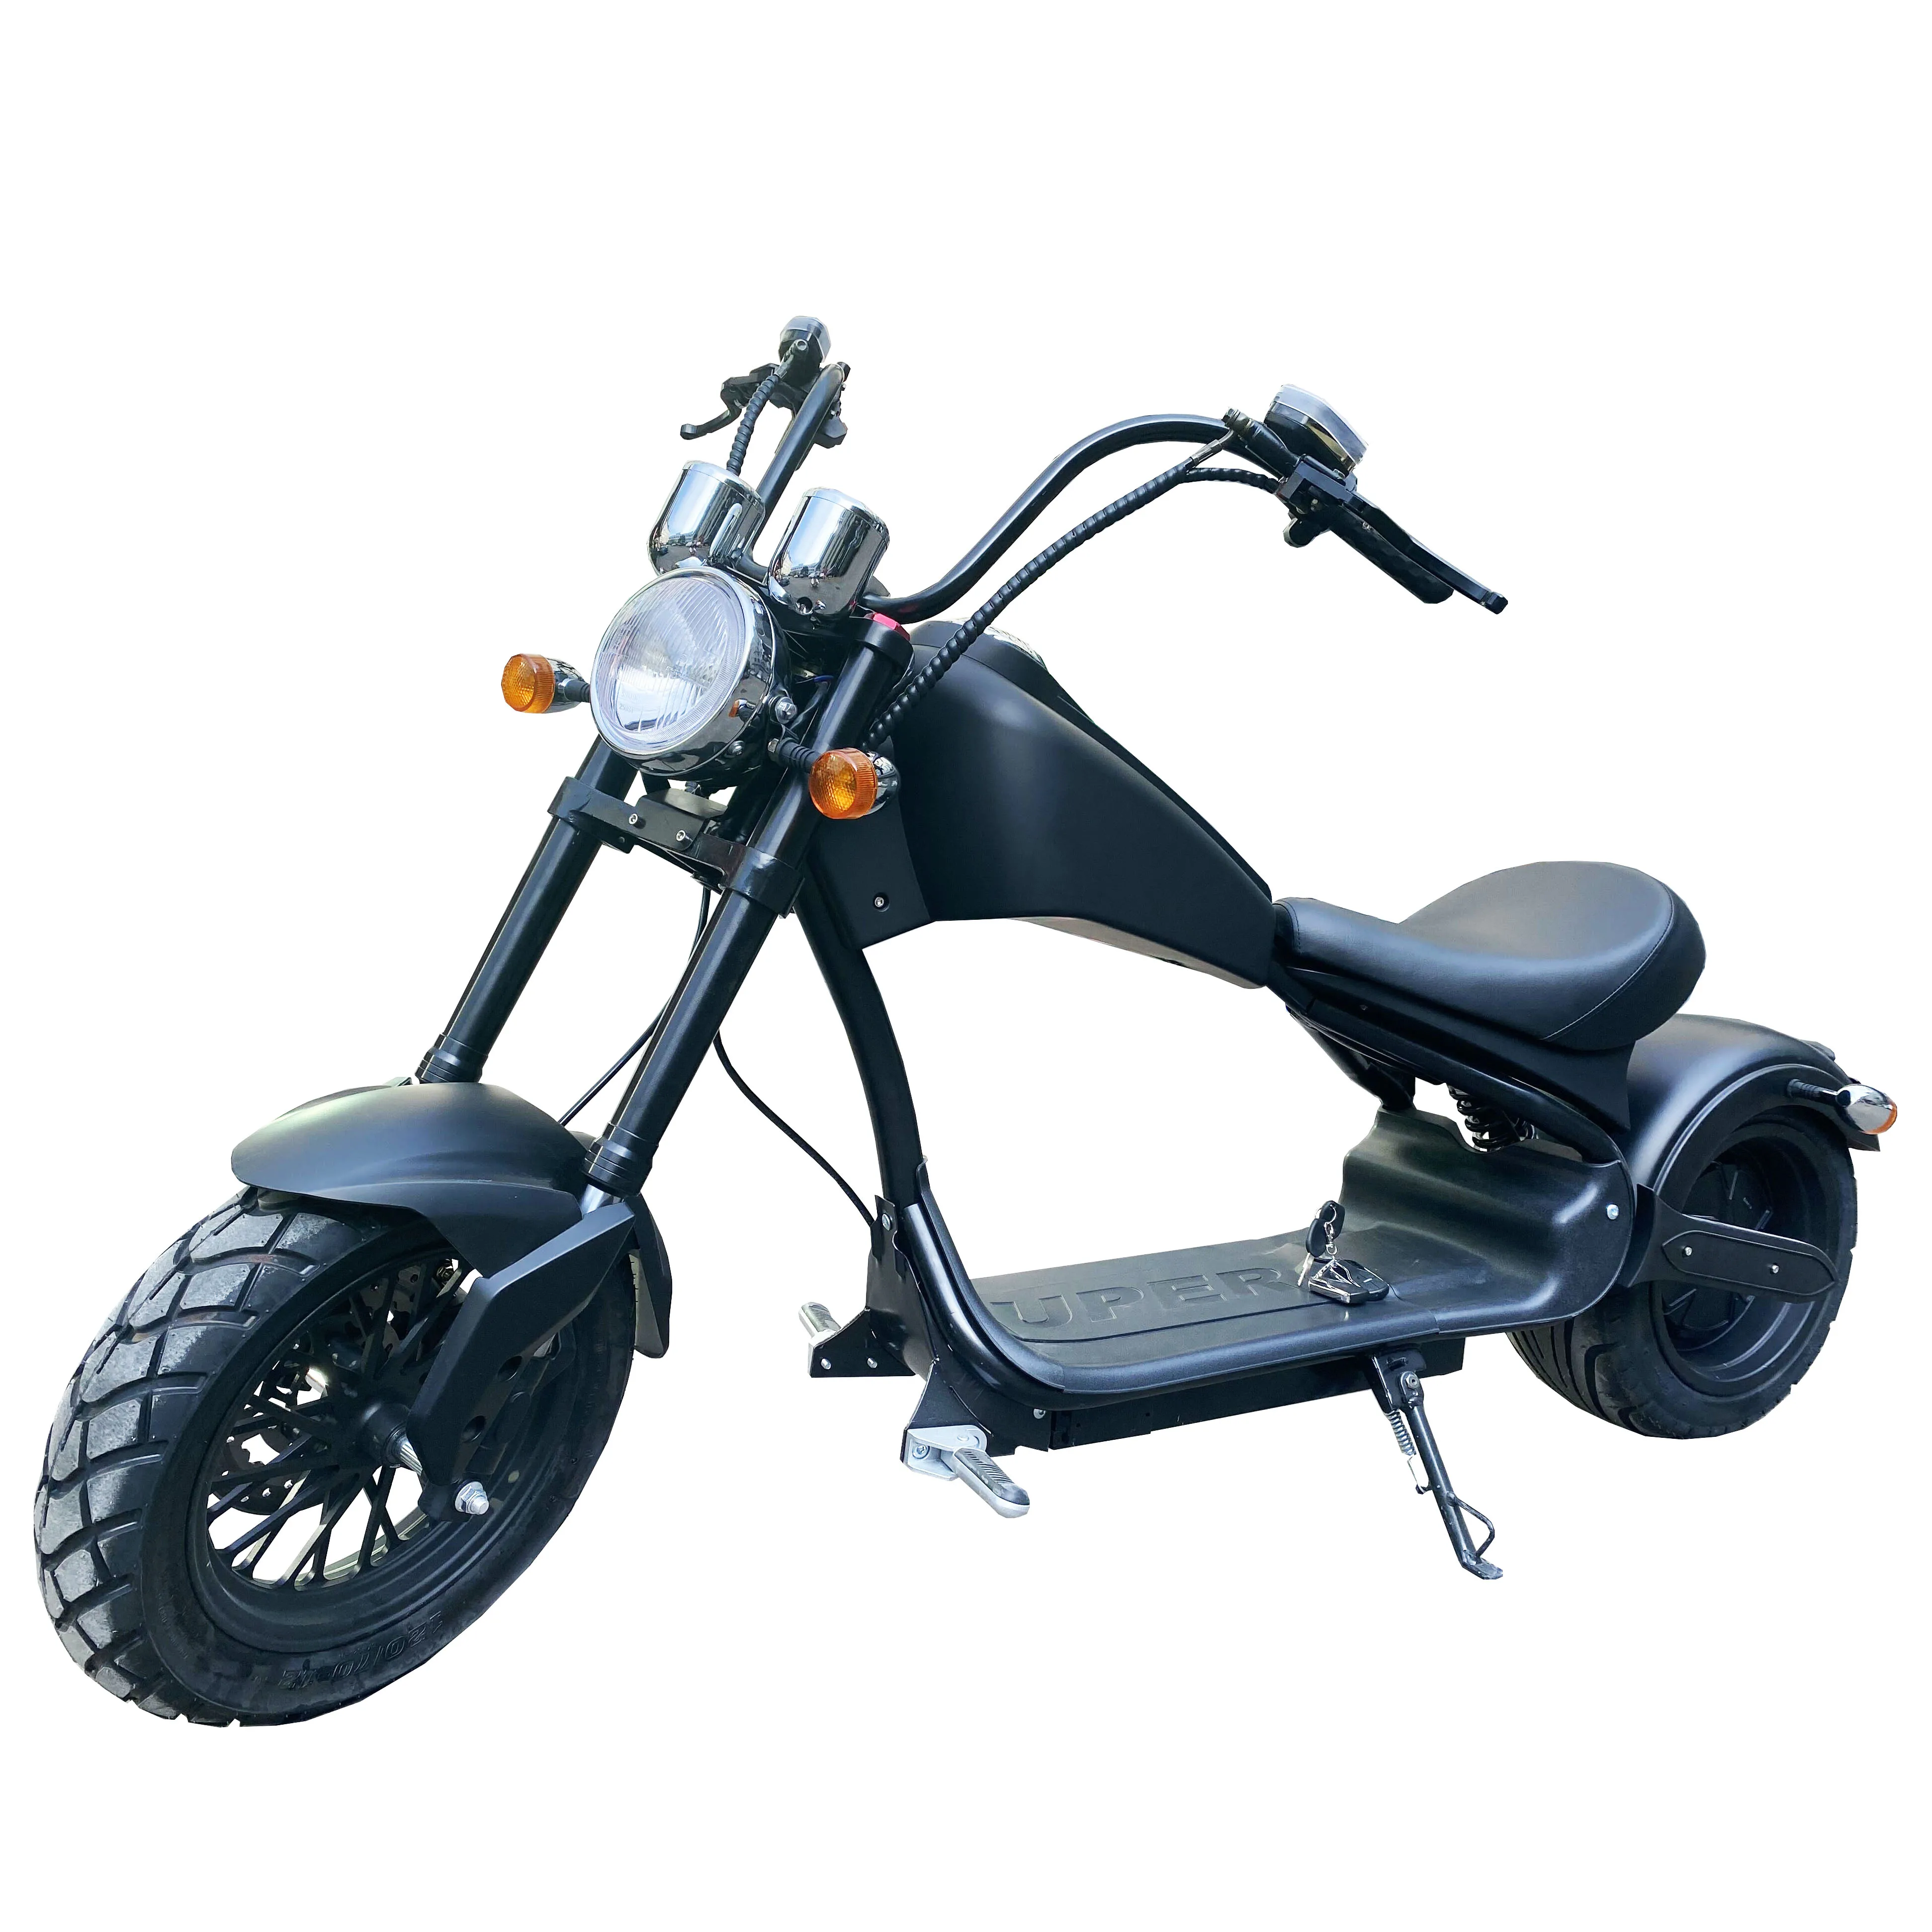 

Eec Coc Overseas Warehouse Spot Fat Tire Motorcycle Patinete Electrico Scooter Electric Citycoco